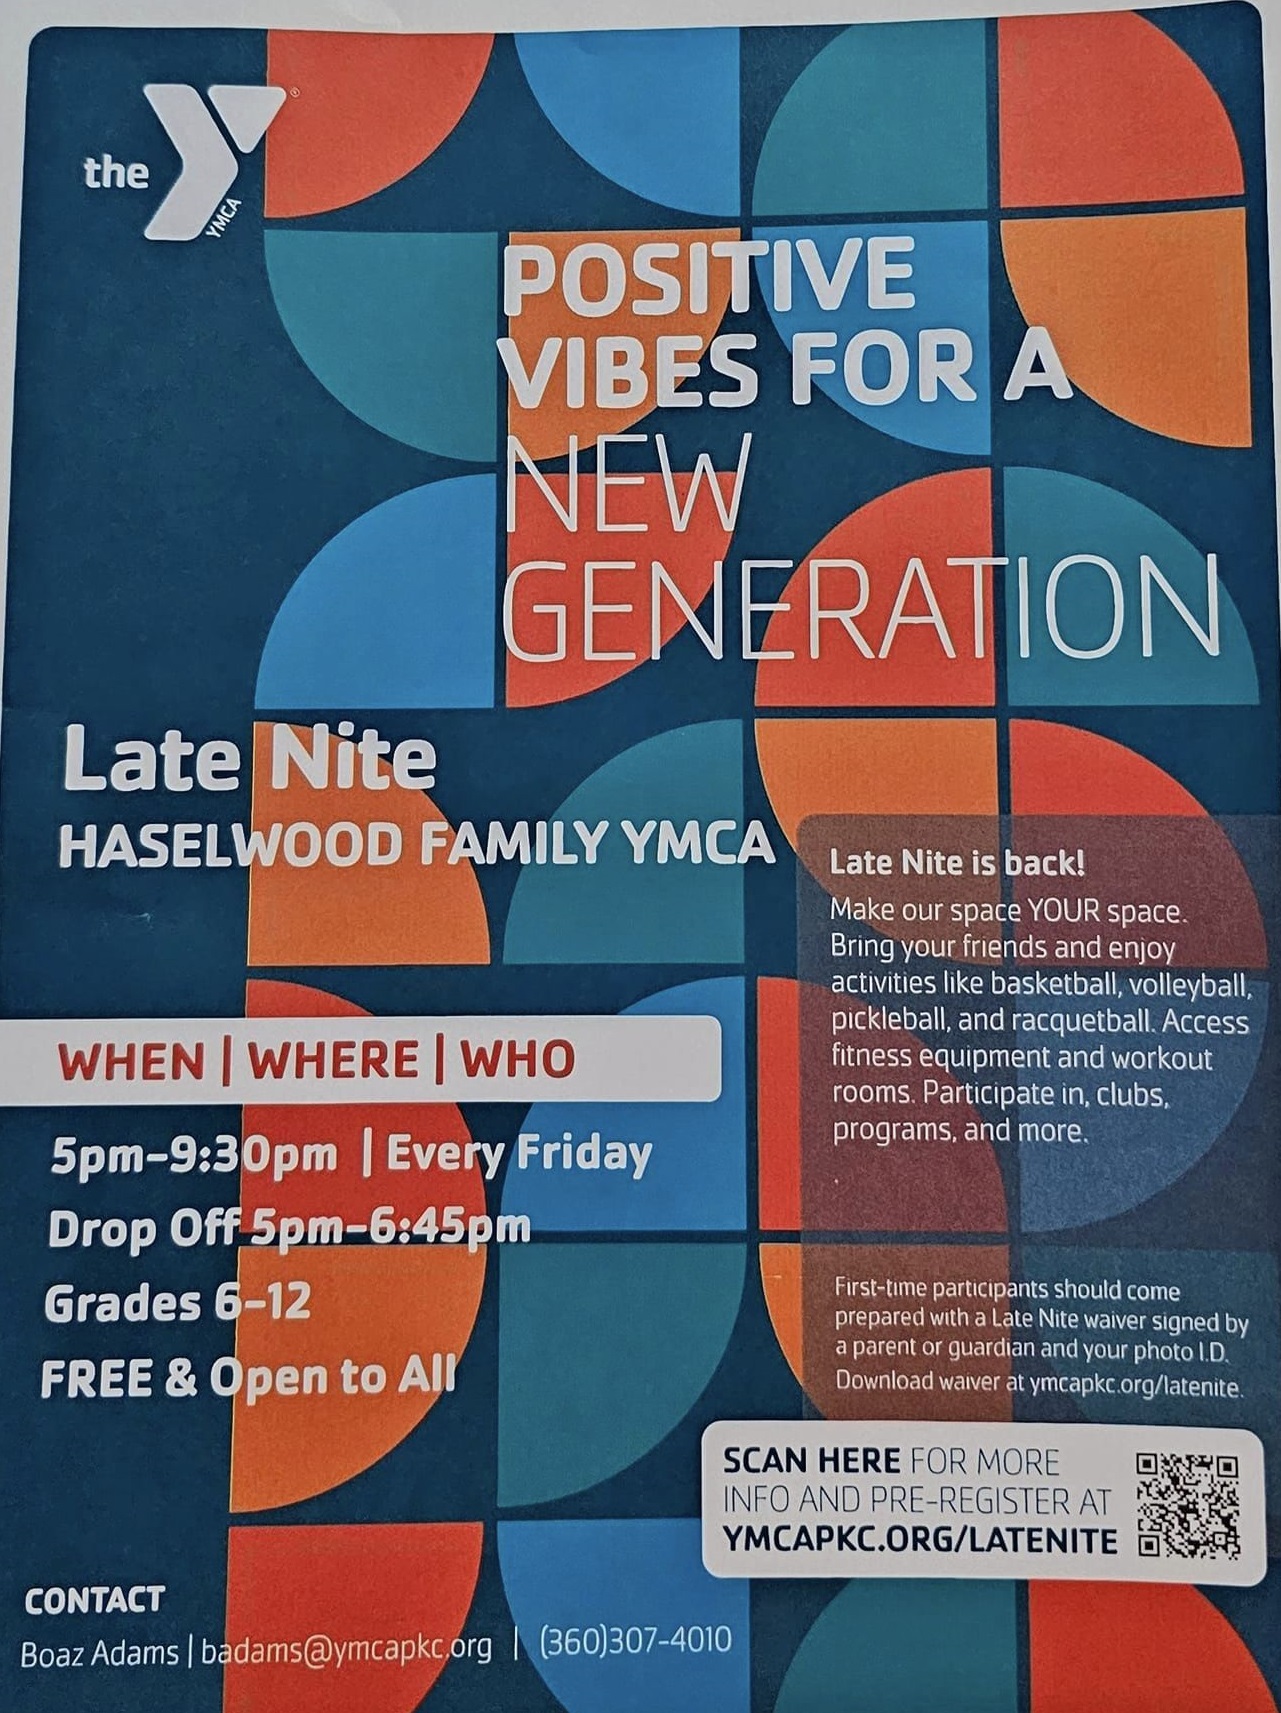 Late Nite at the Haselwood Family YMCA